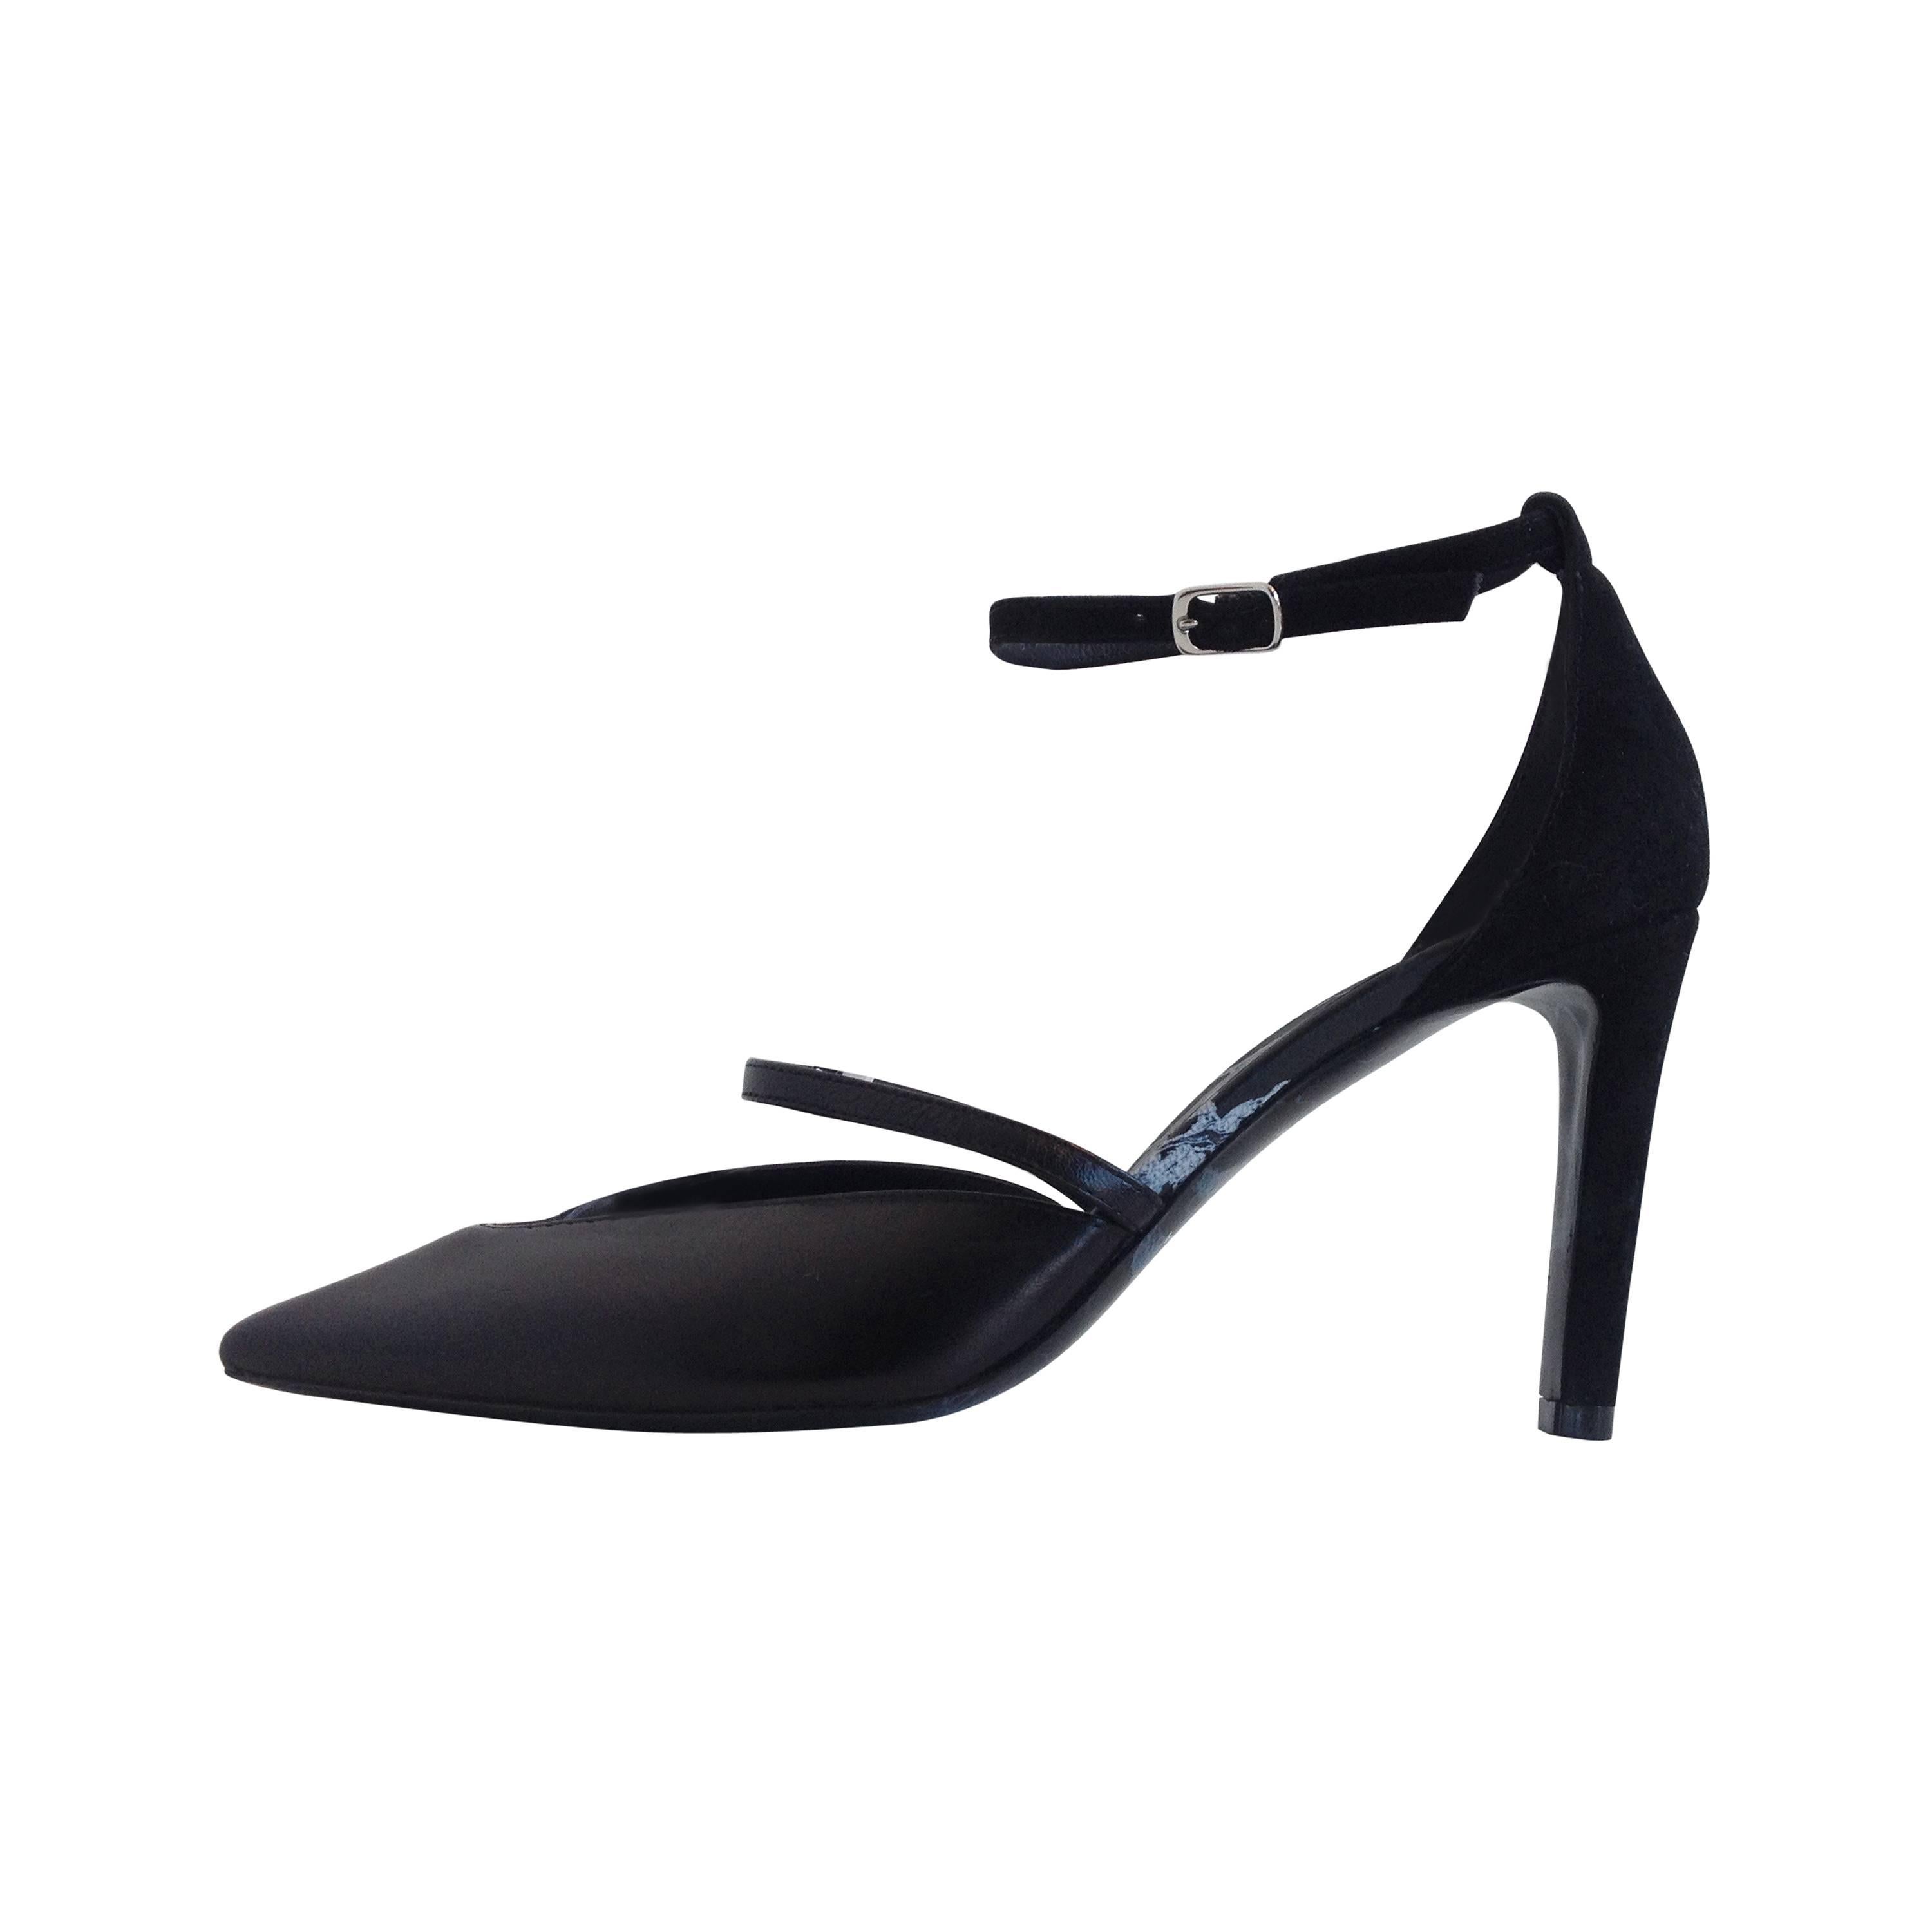 Balenciaga Black Suede and Leather Ankle Strap Heels Size 38 (7.5) For Sale